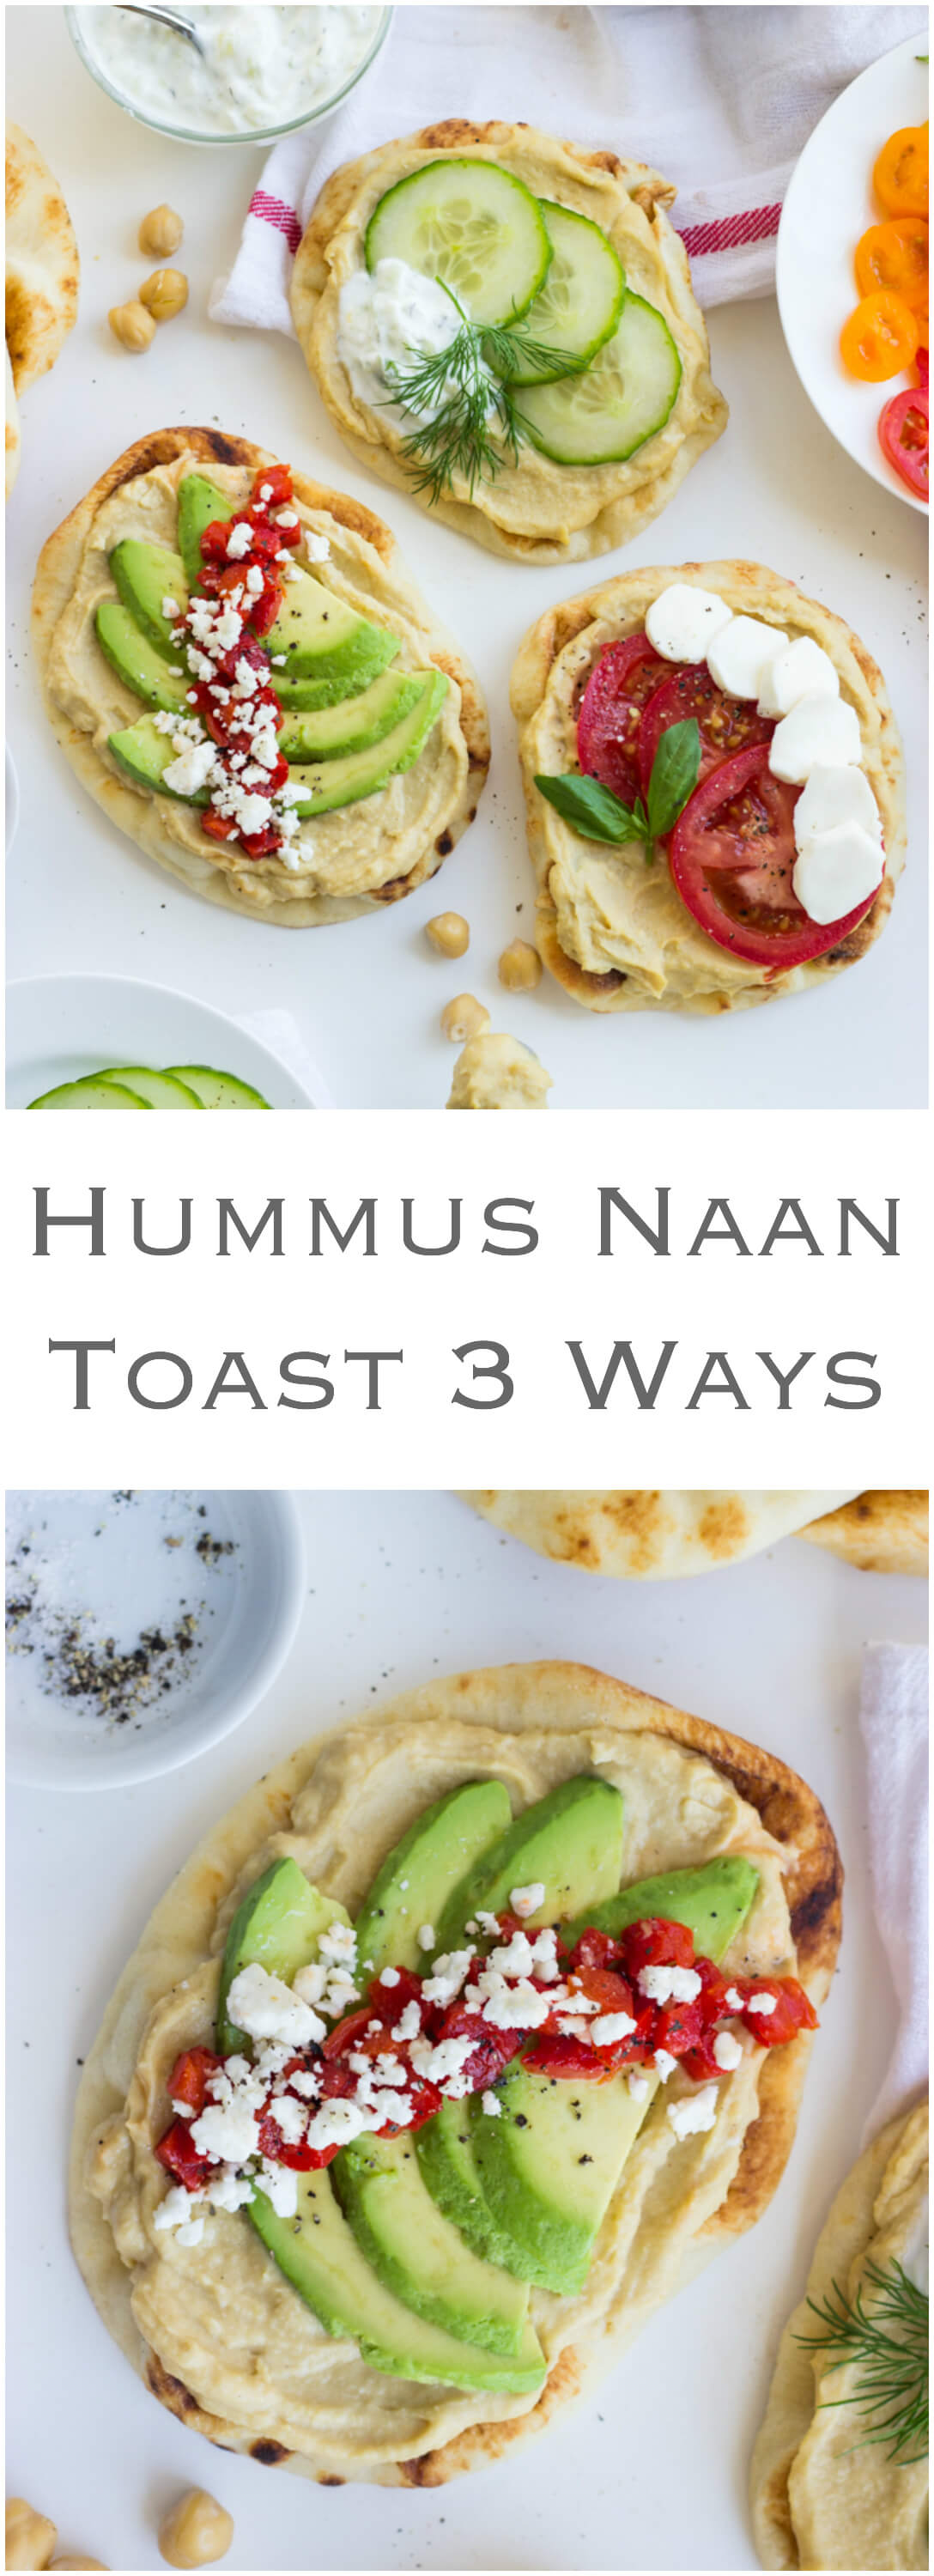 Hummus Naan Toast 3 Ways - give your morning toast a makeover with this easy naan bread. Simple, fresh and veggie loaded toppings will surely keep you full and healthy! | littlebroken.com @littlebroken